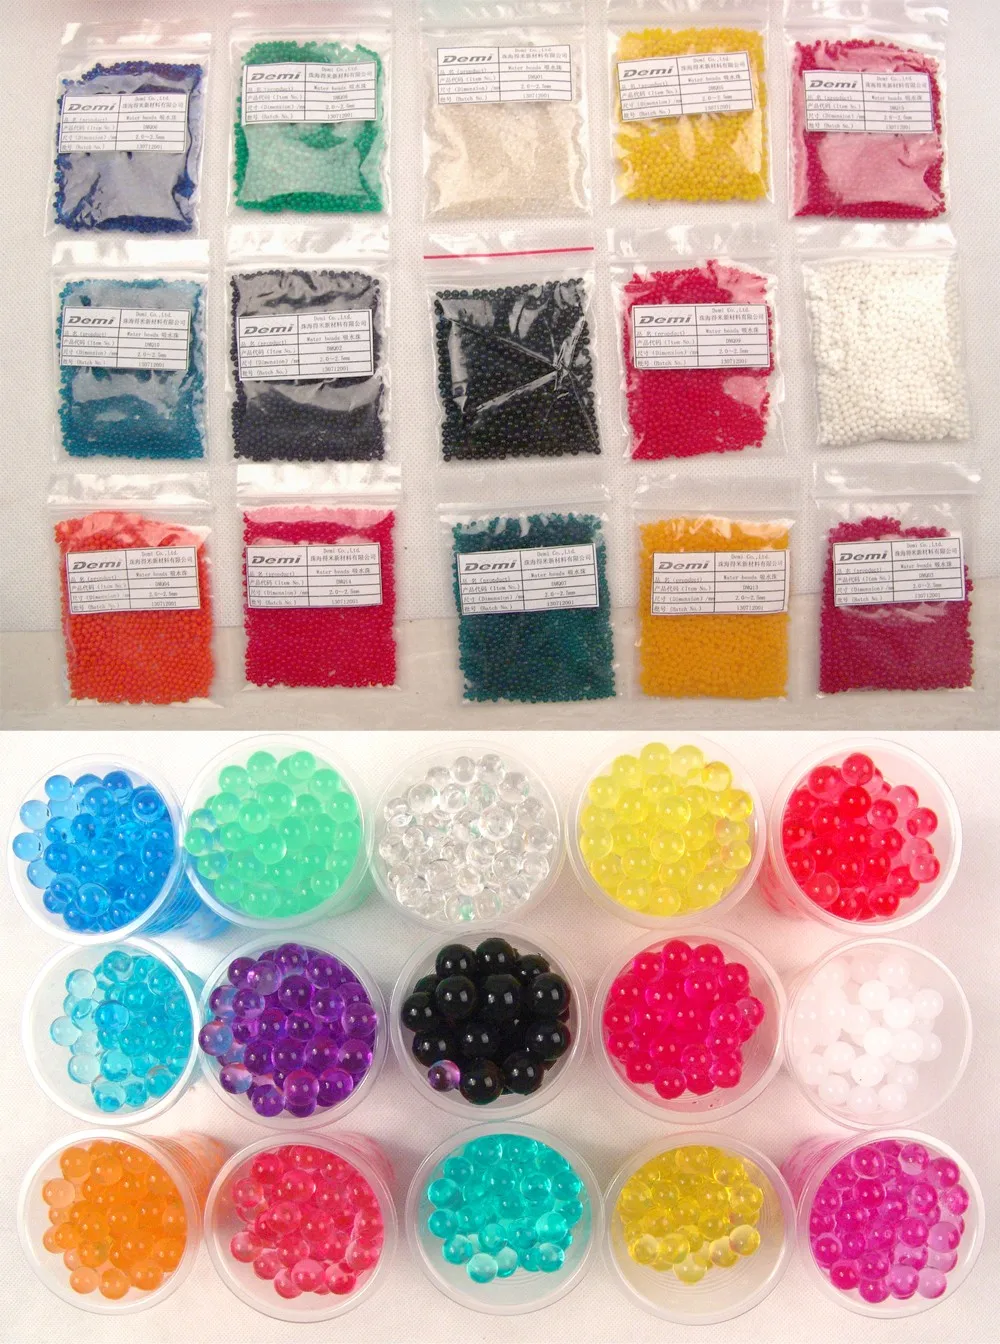 Aqua gems water aqua beads for planting and gardening,water beads with candle centerpieces